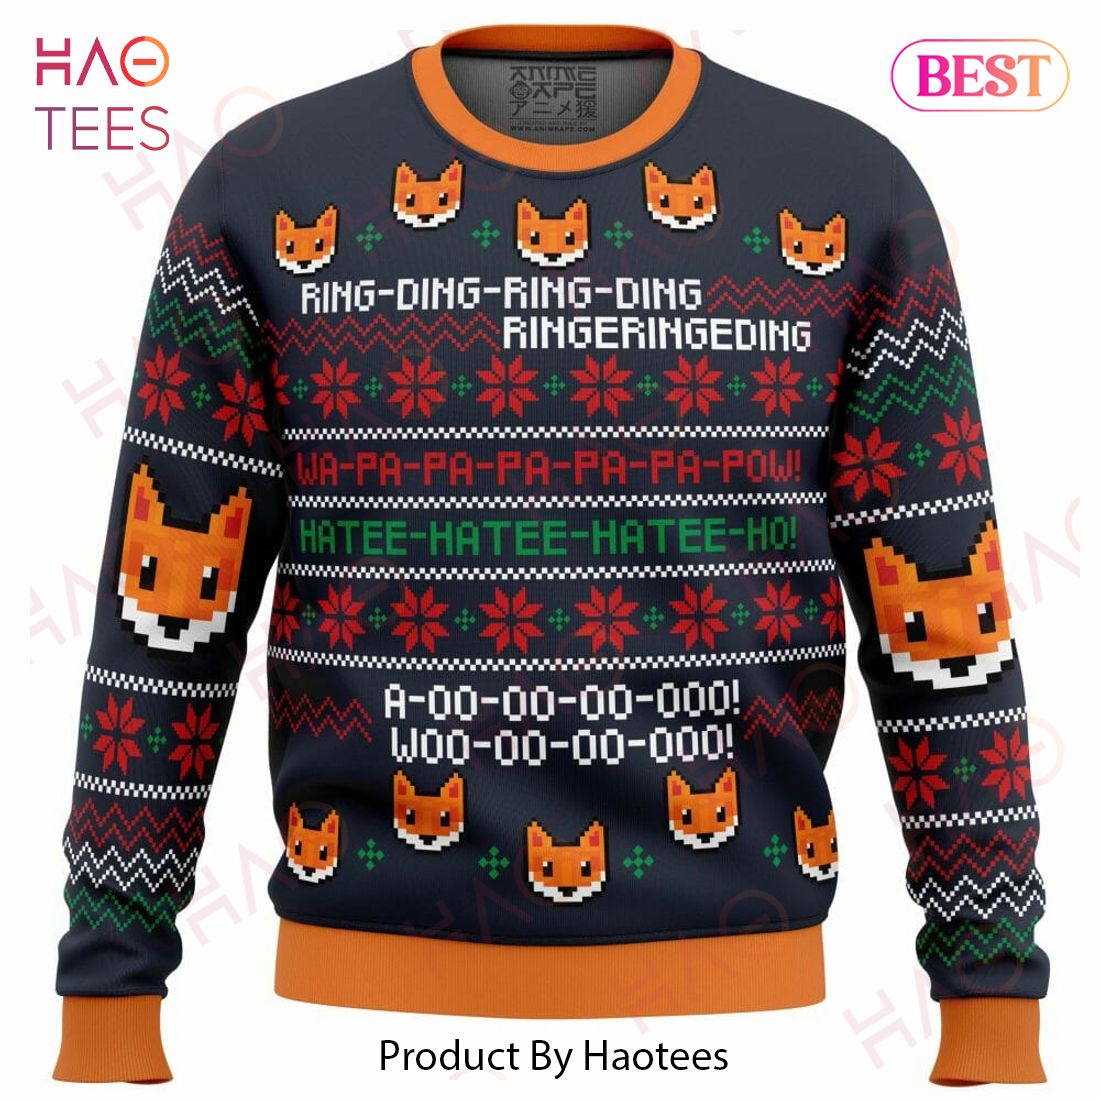 What Does The Fox Say Christmas Sweater